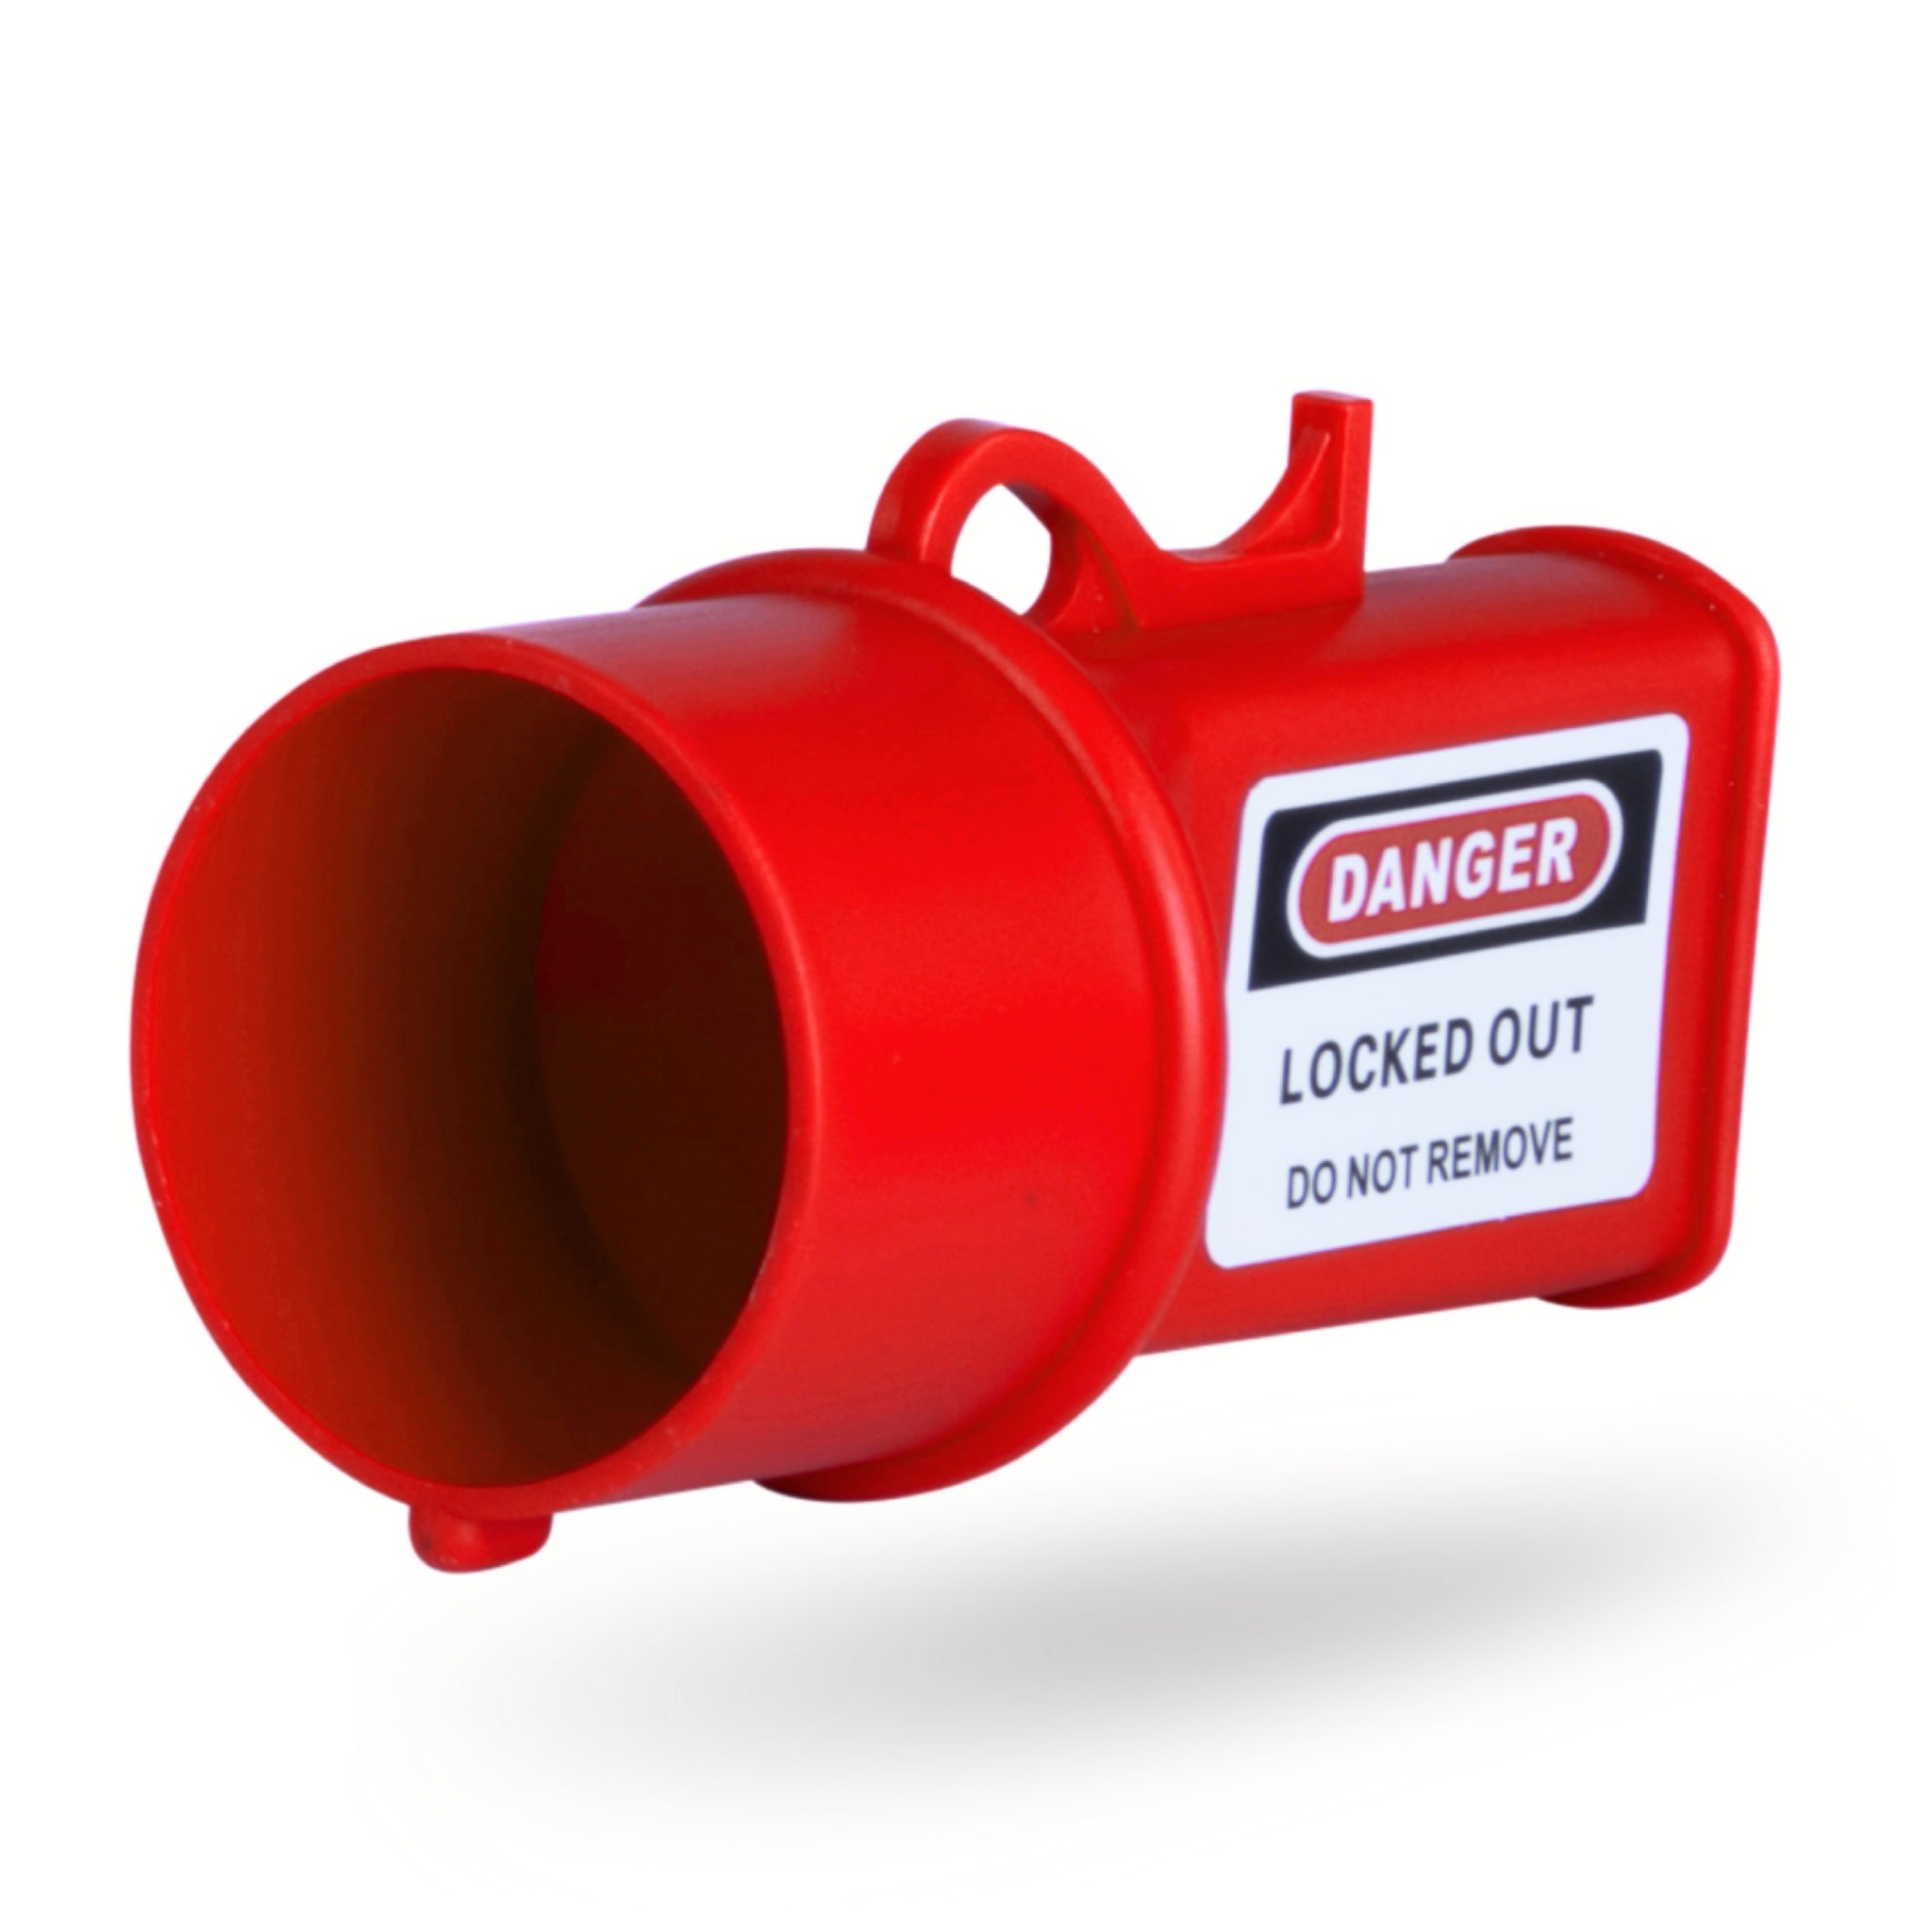 TRADESAFE Pin and Sleeve Receptacle Lockout Tagout Device, Electrical Outlet Lock, 2 inch Diameter, Size: 2” Diameter, Red